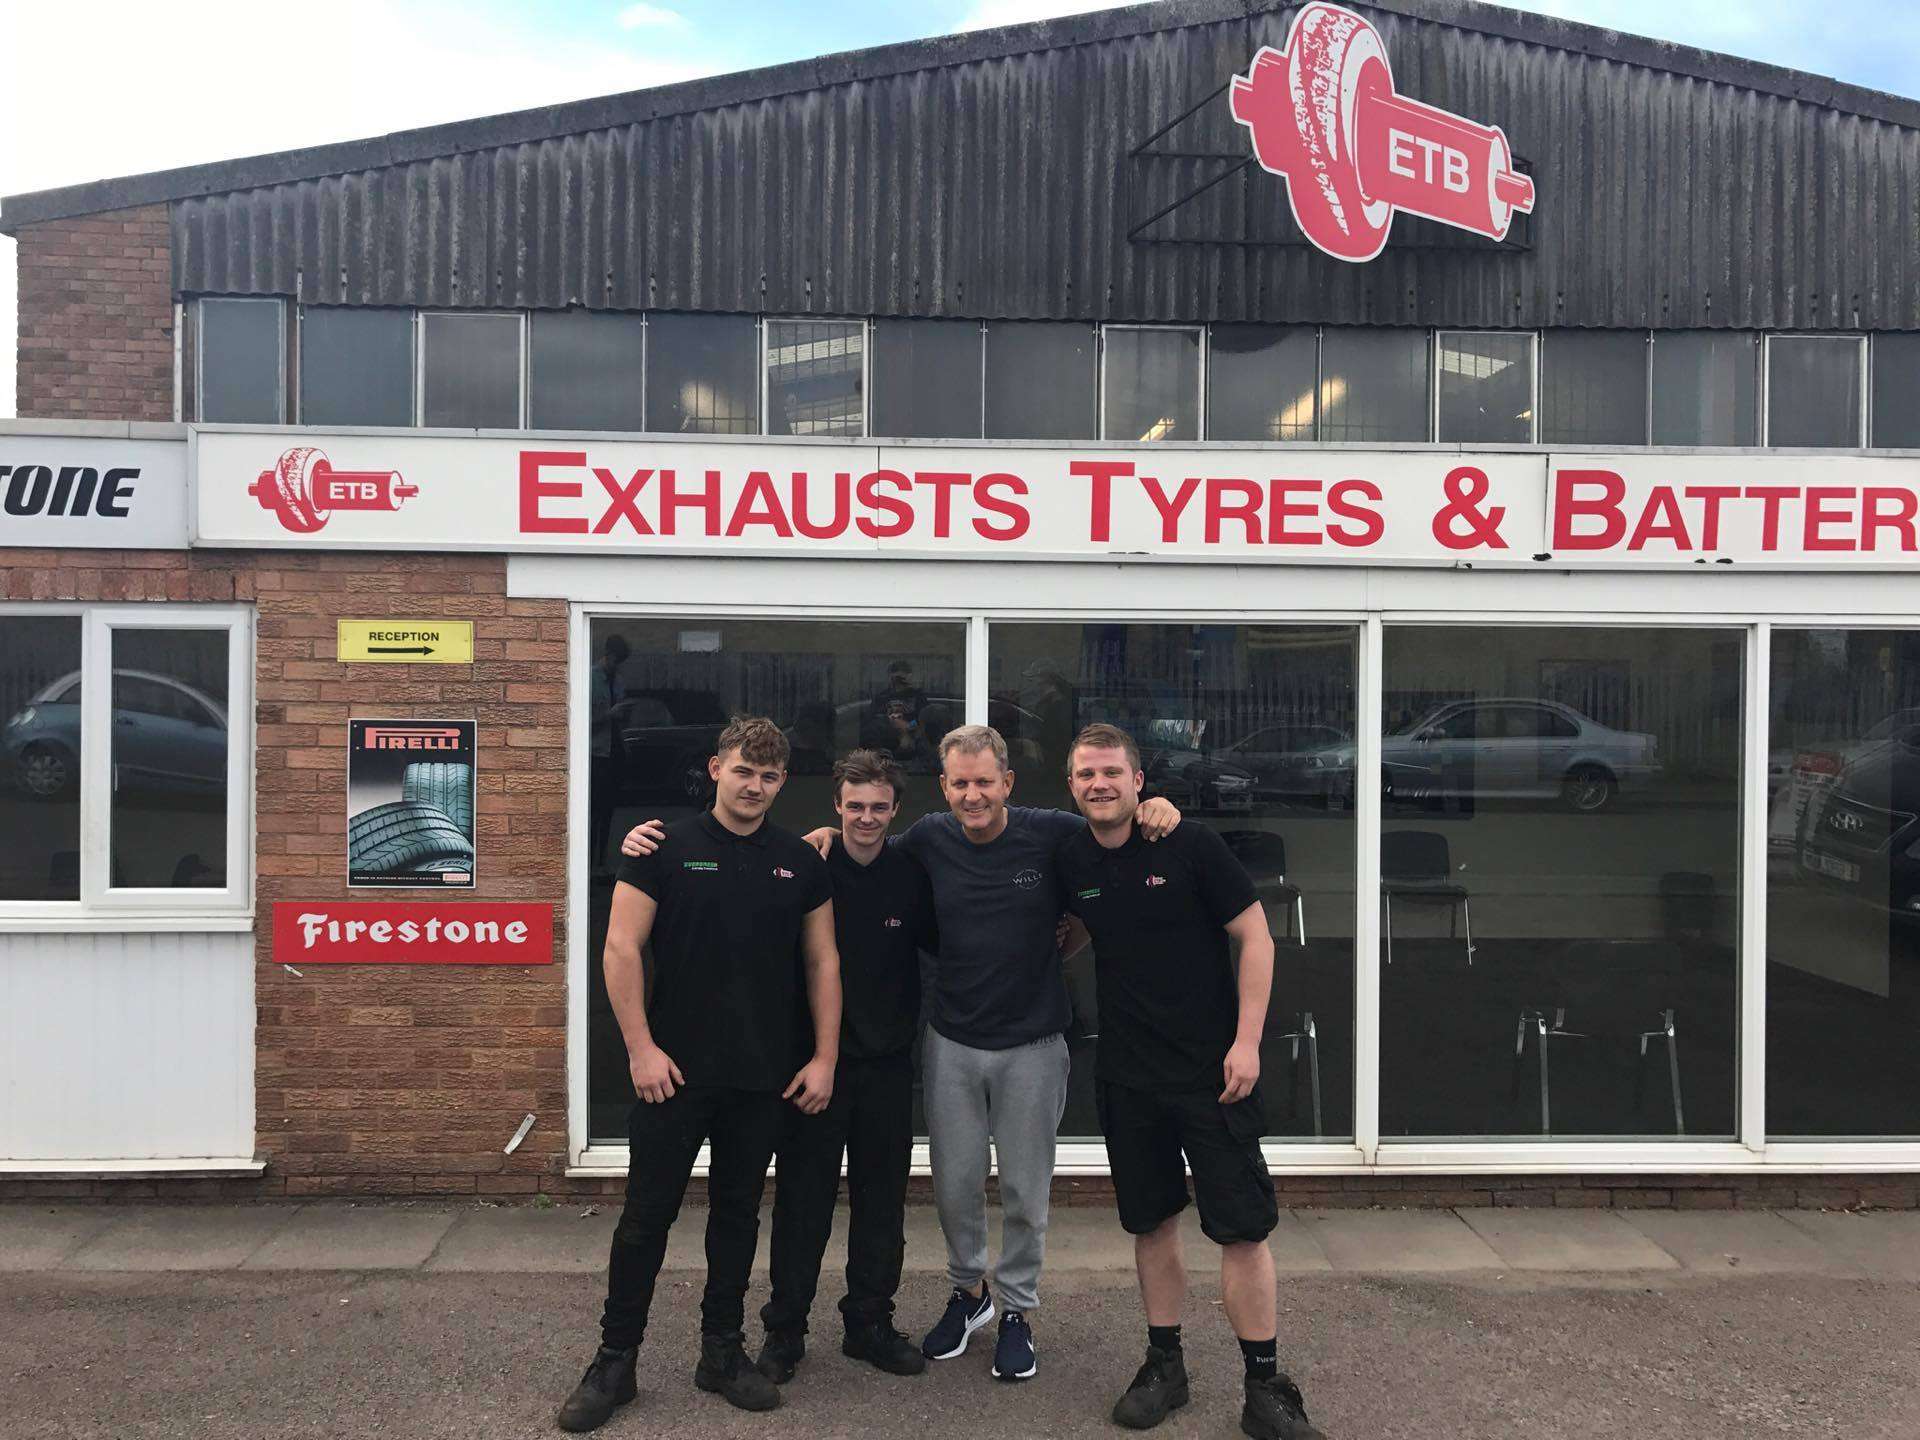 ETB Cheltenham Depot for Exhausts Tyres and Batteries